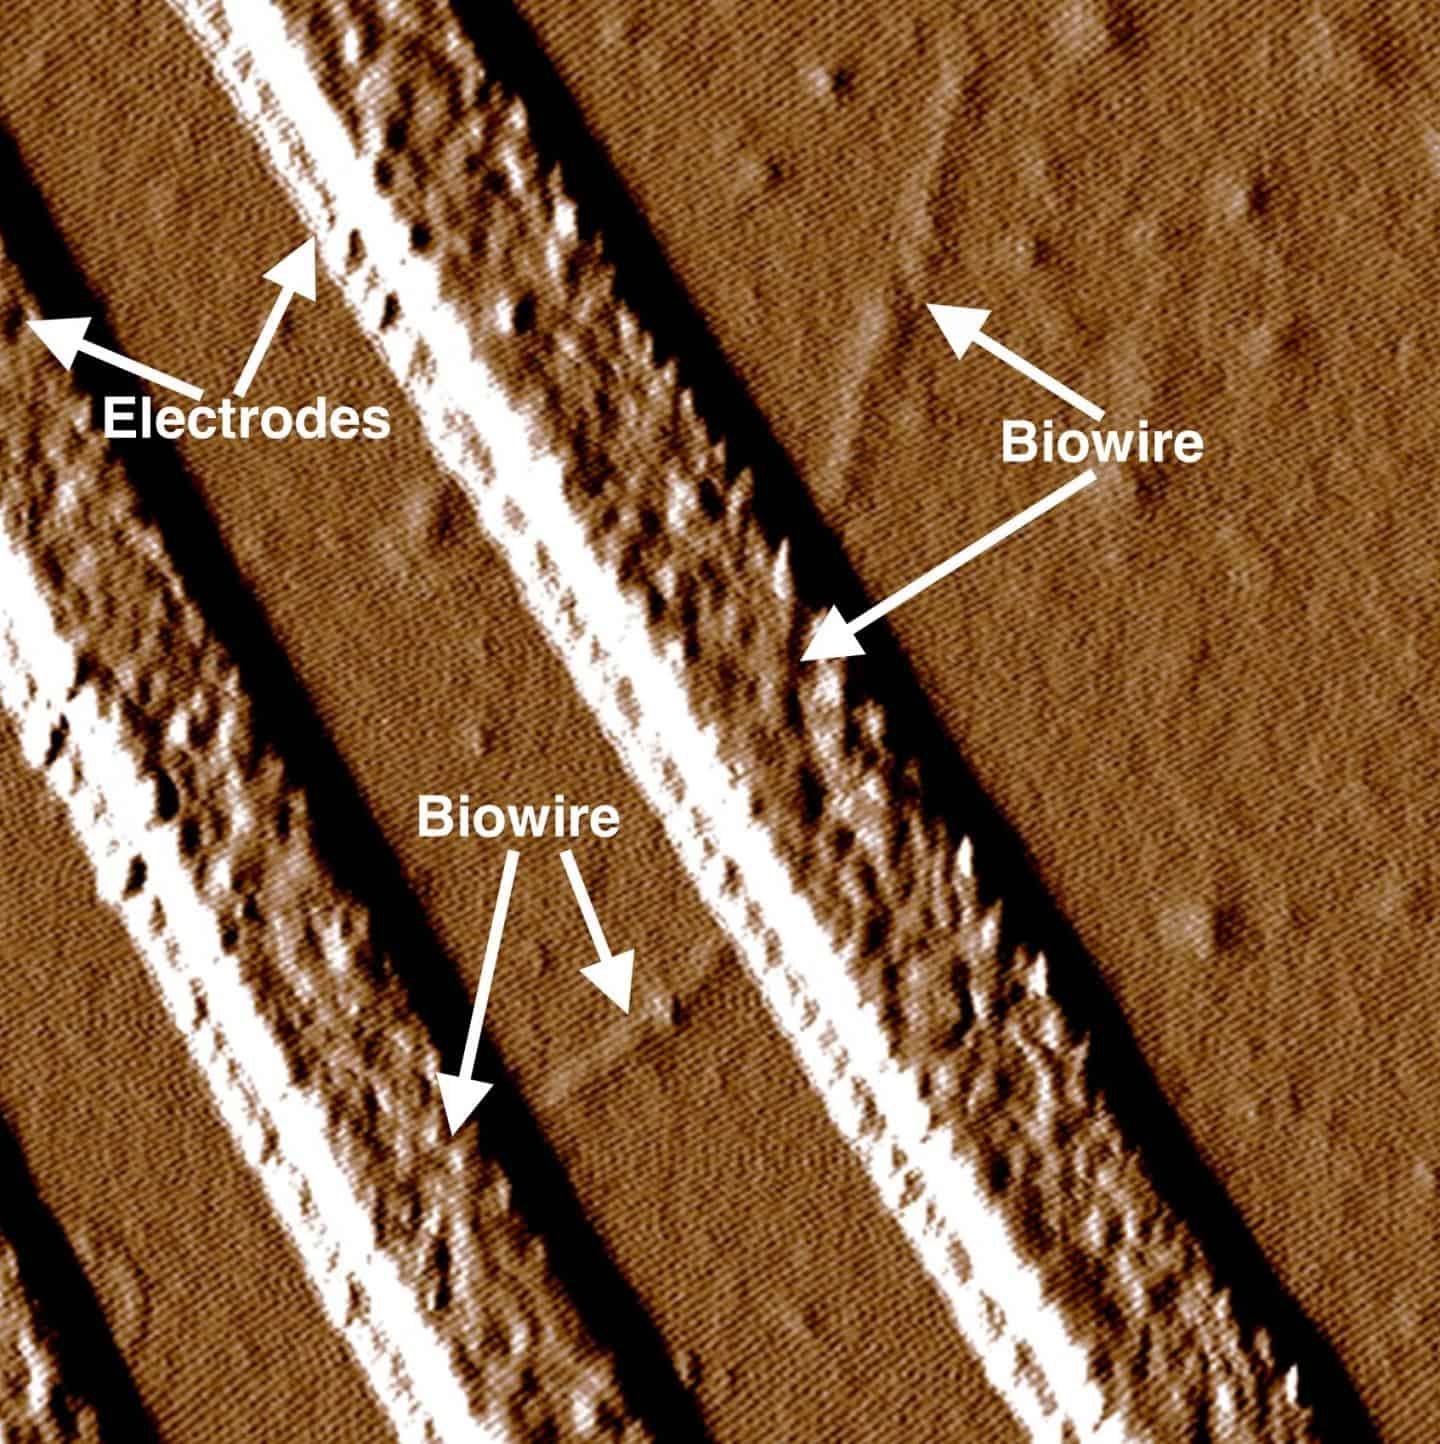  synthetic nano wires produced by the Amherst team. Credit: Dr Derek Lovley